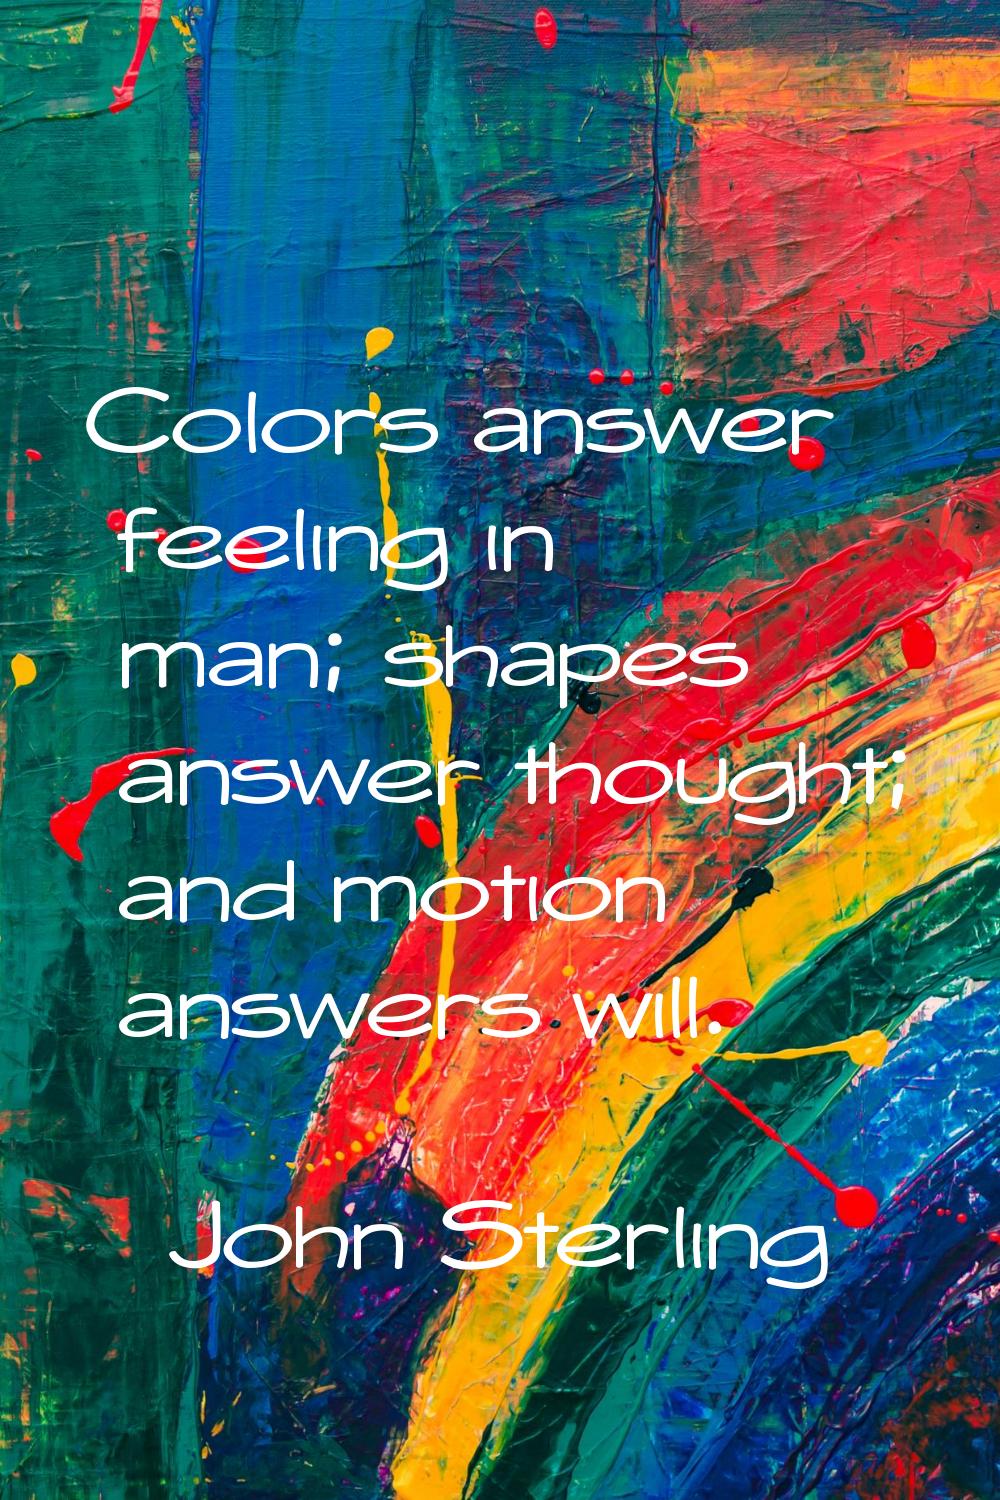 Colors answer feeling in man; shapes answer thought; and motion answers will.